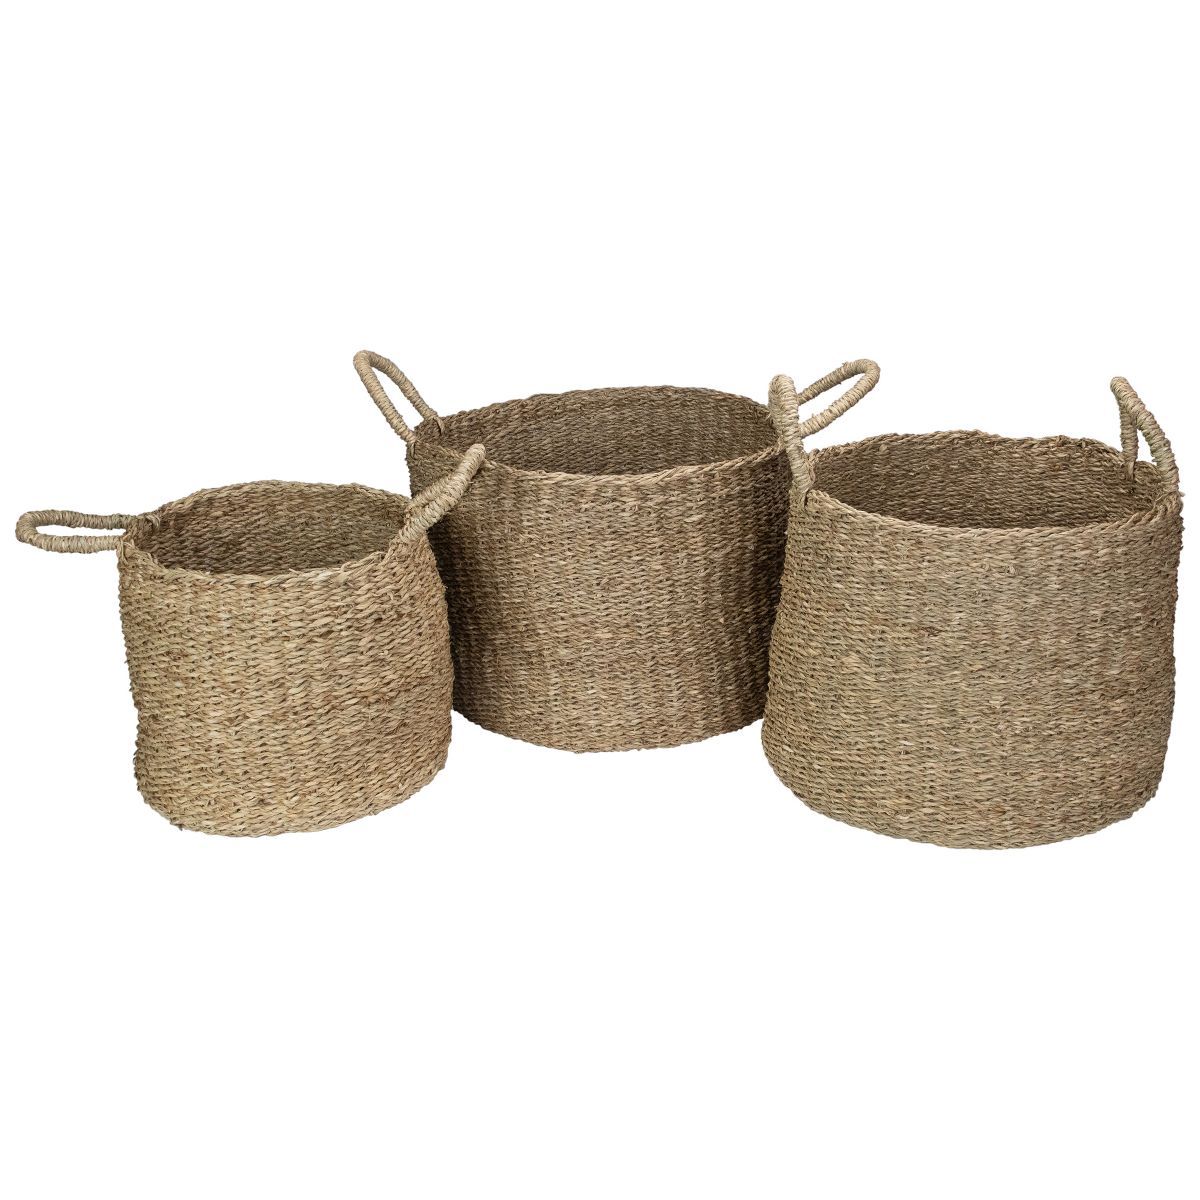 Northlight Set of 3 Natural Beige Round Seagrass Table and Floor Baskets | Target